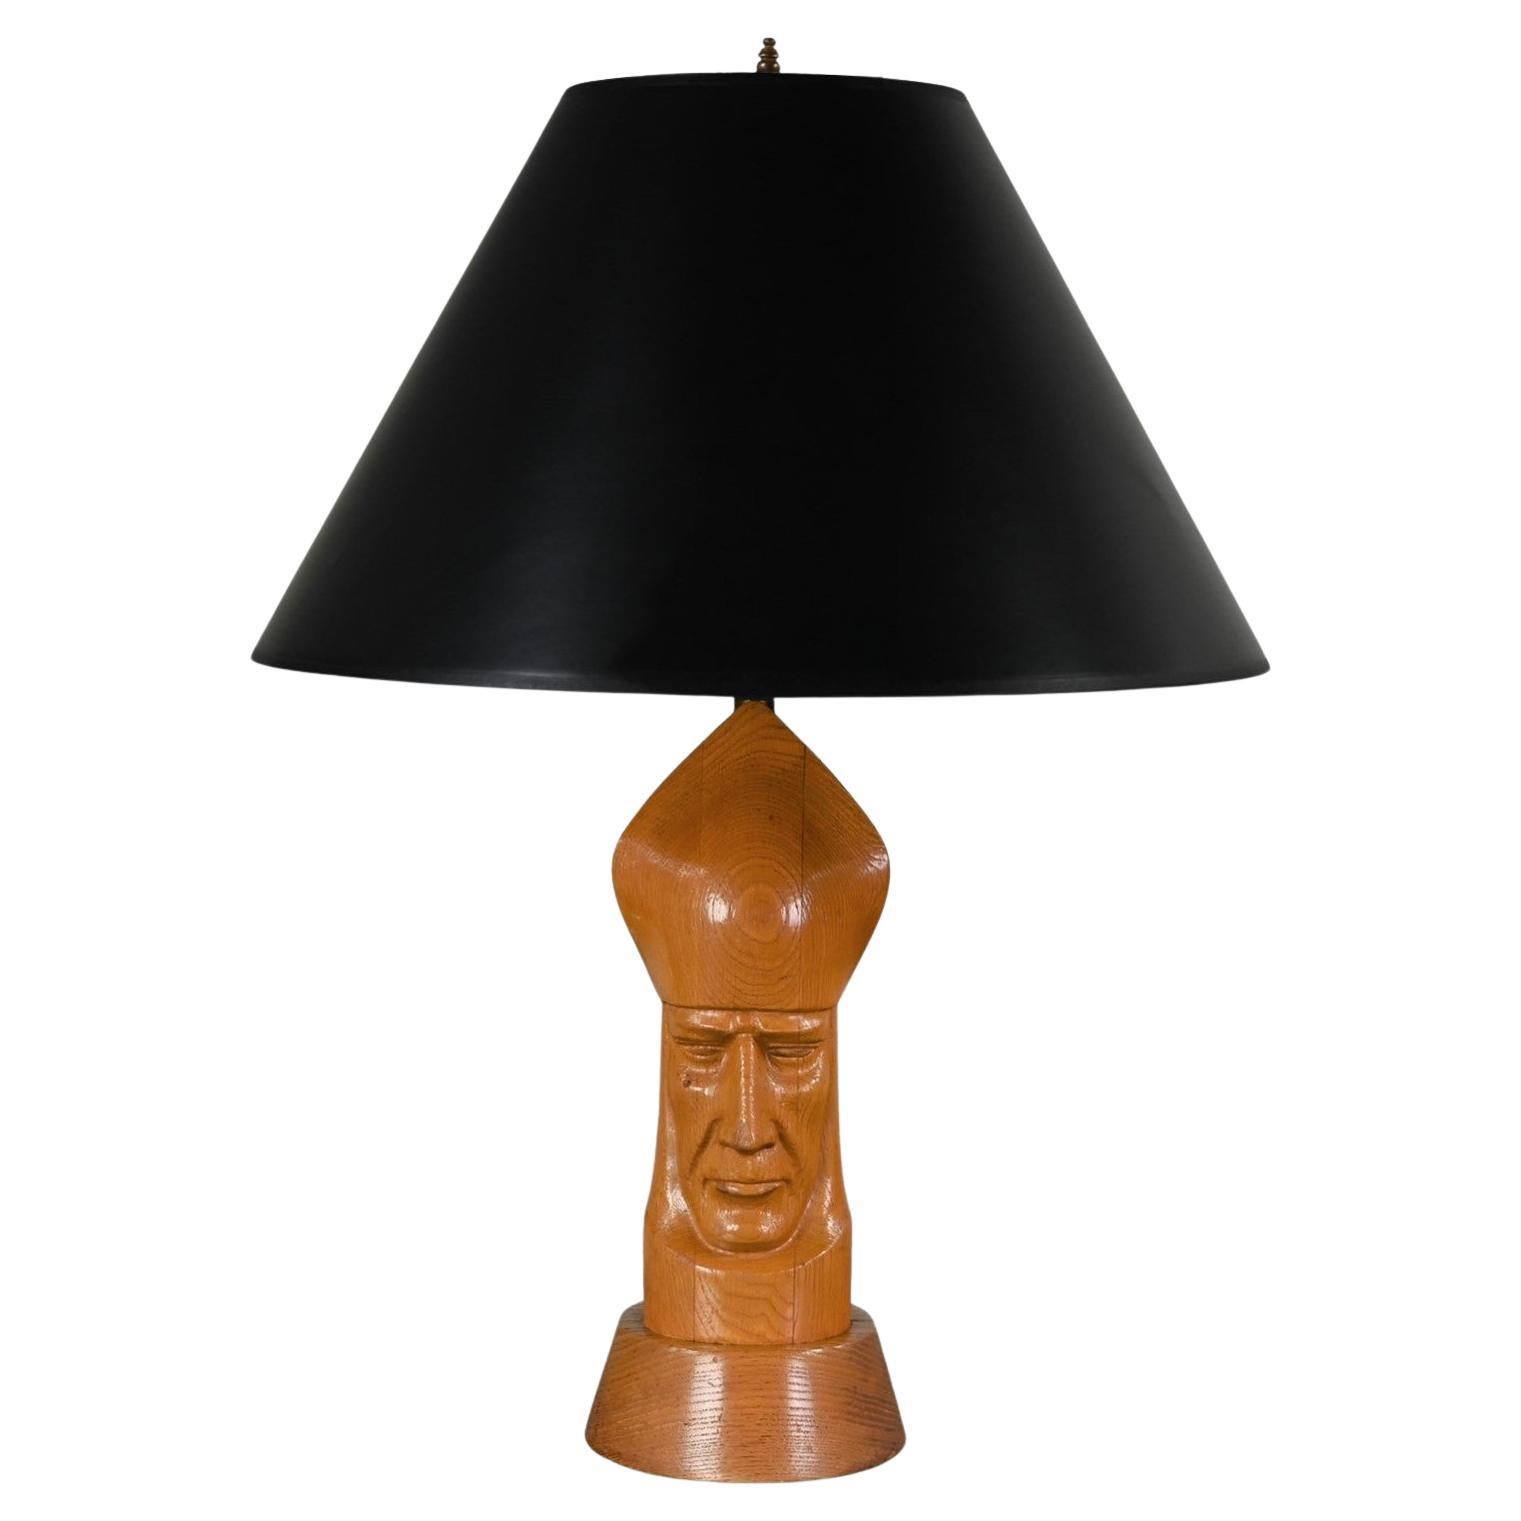 Mid-20th Century MCM Carved Wood Bishop Chess Piece Table Lamp Black Paper Shade